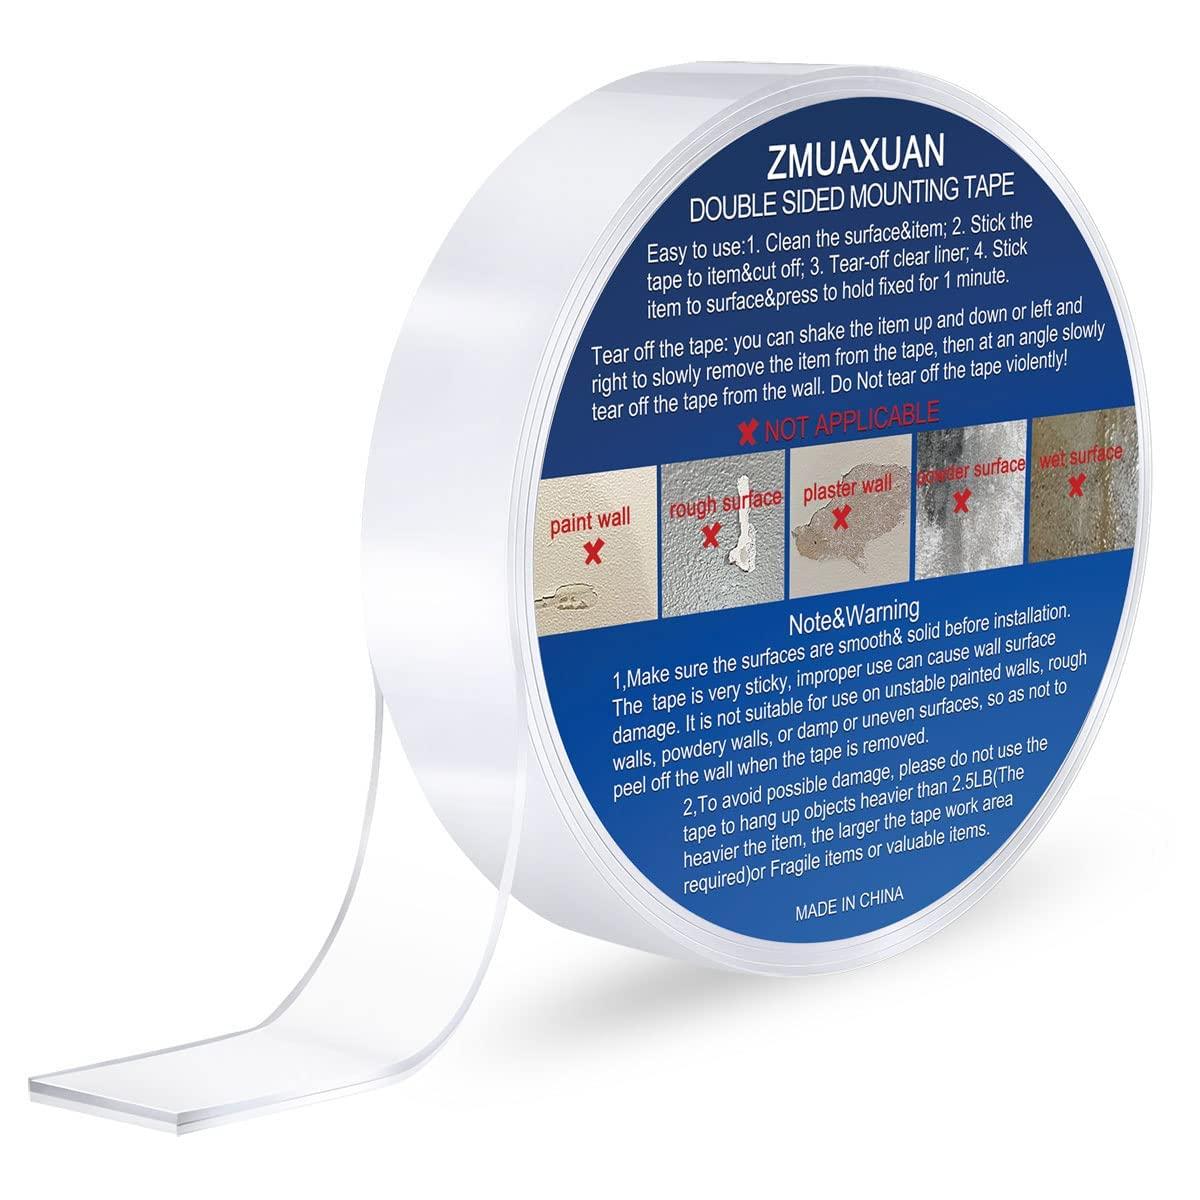 ZMUAXUAN Strong Nano Double Sided Tape Heavy Duty Mounting,Clear Removable  Sticky Adhesive Strips No Damage Wall, Waterproof Reusable Thick Gel Grip  Washable for Hanging Picture,Poster,Carpet,Photo